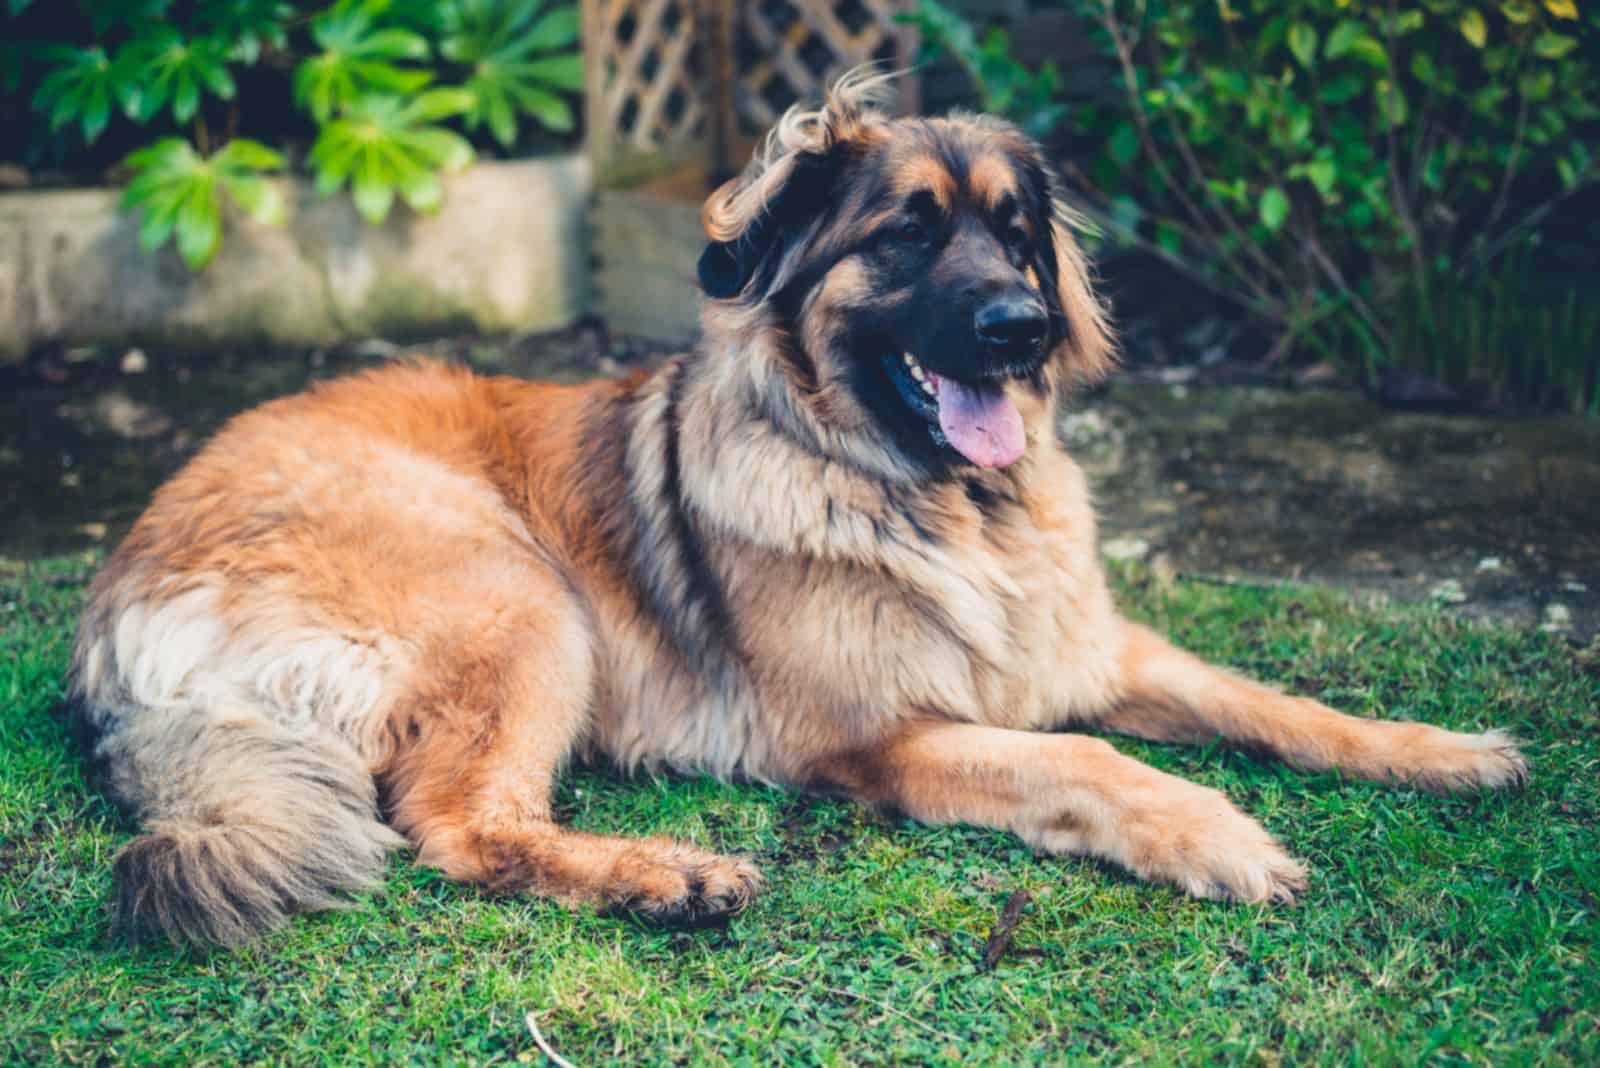 leonberger dog is relaxing on the lawn